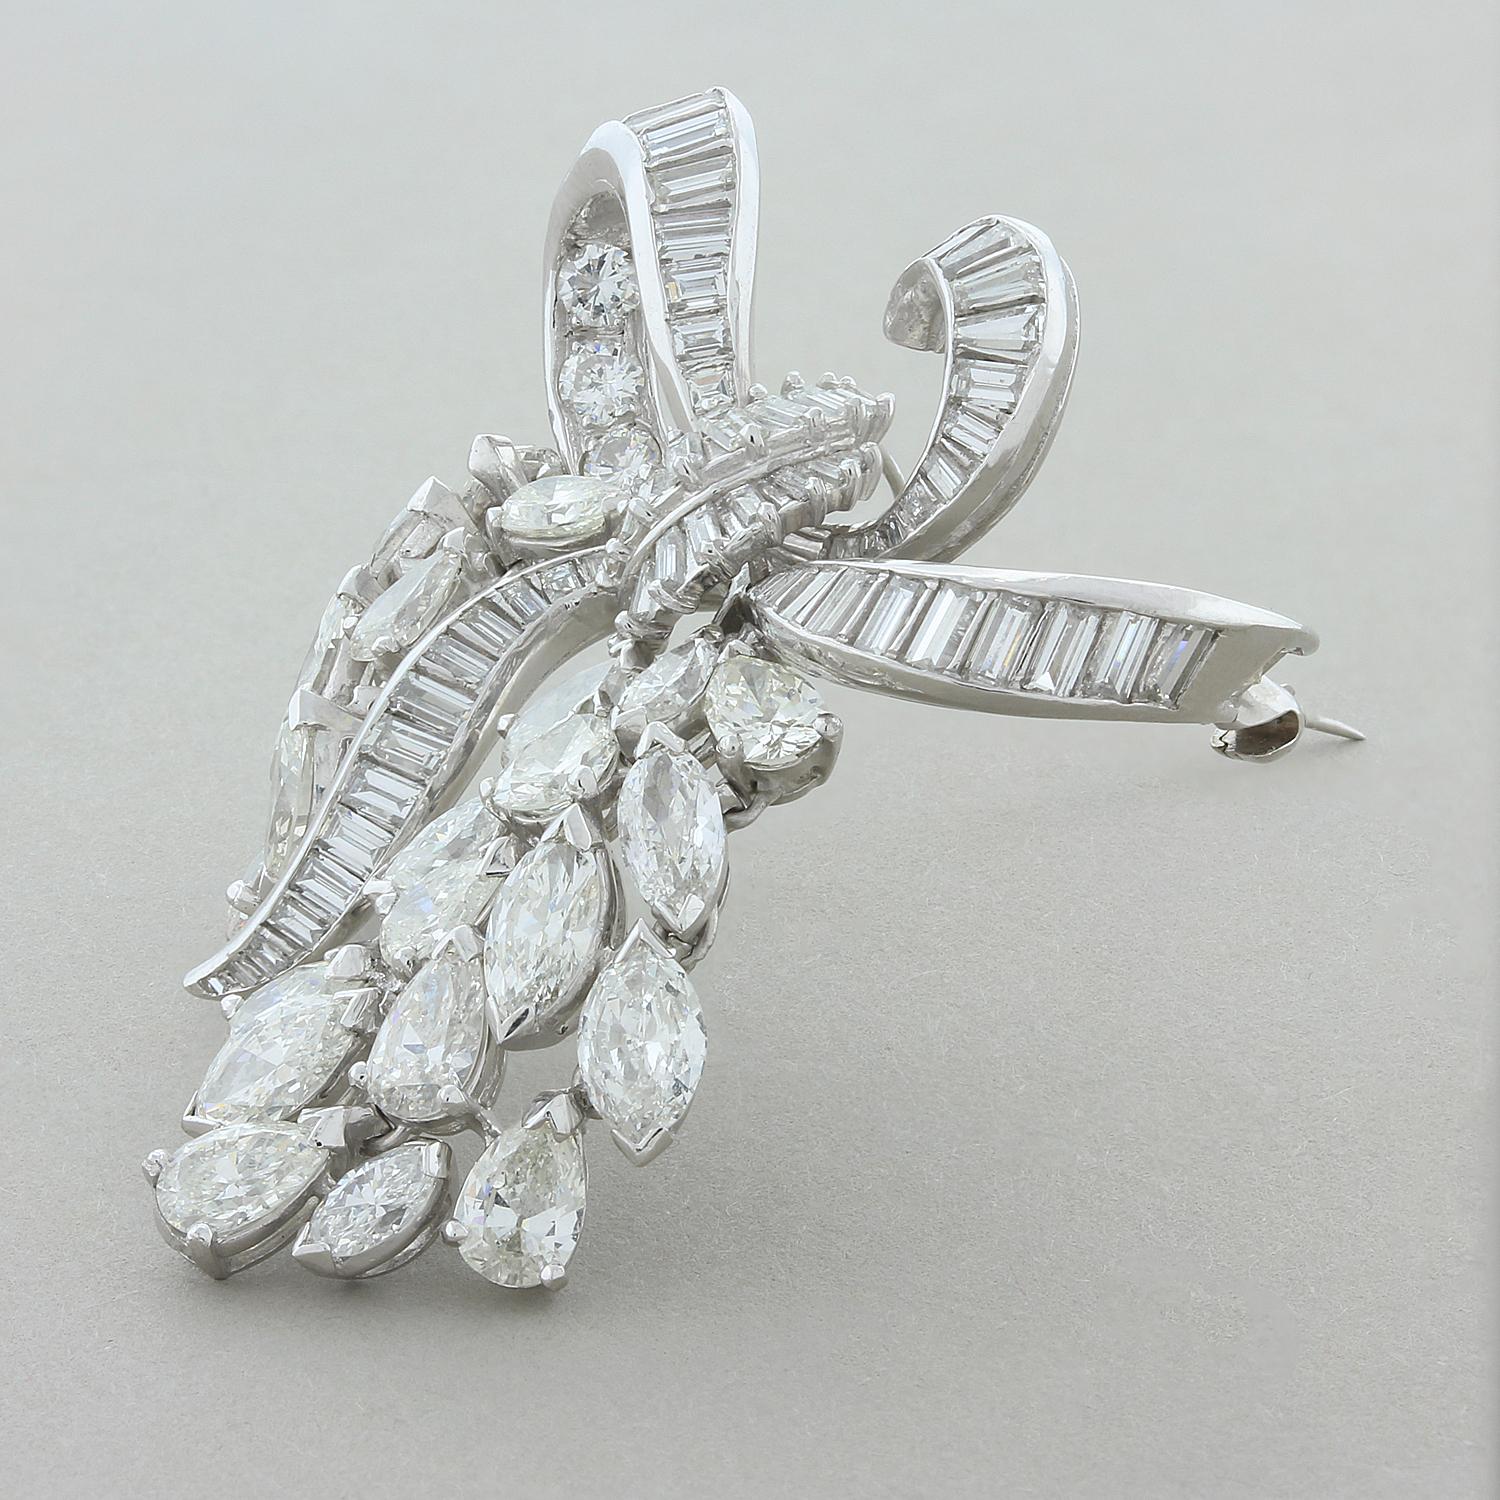 This expertly hand-crafted mid-century brooch, circa 1950, features large pear and marquise shape diamonds with baguette and round cut diamonds totaling 10.71 carats. The baguette and round cut diamonds create the bow while the marquise and pear cut